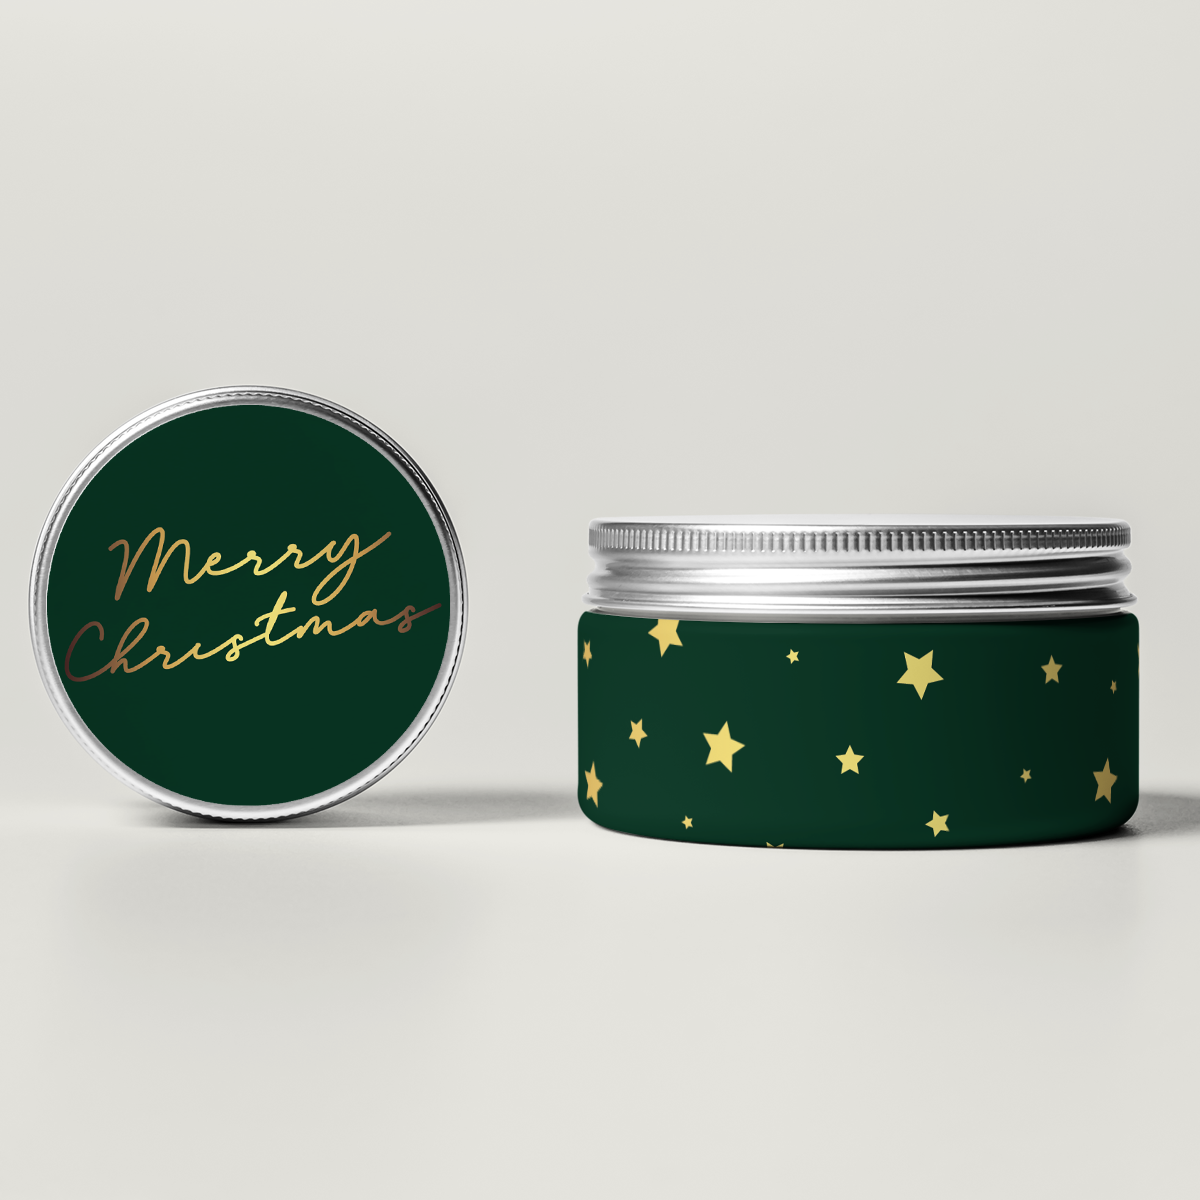 FOILED The Jewel Christmas Collection - Stars Travel Tin Set (Lid and Wrap Label) Mystic